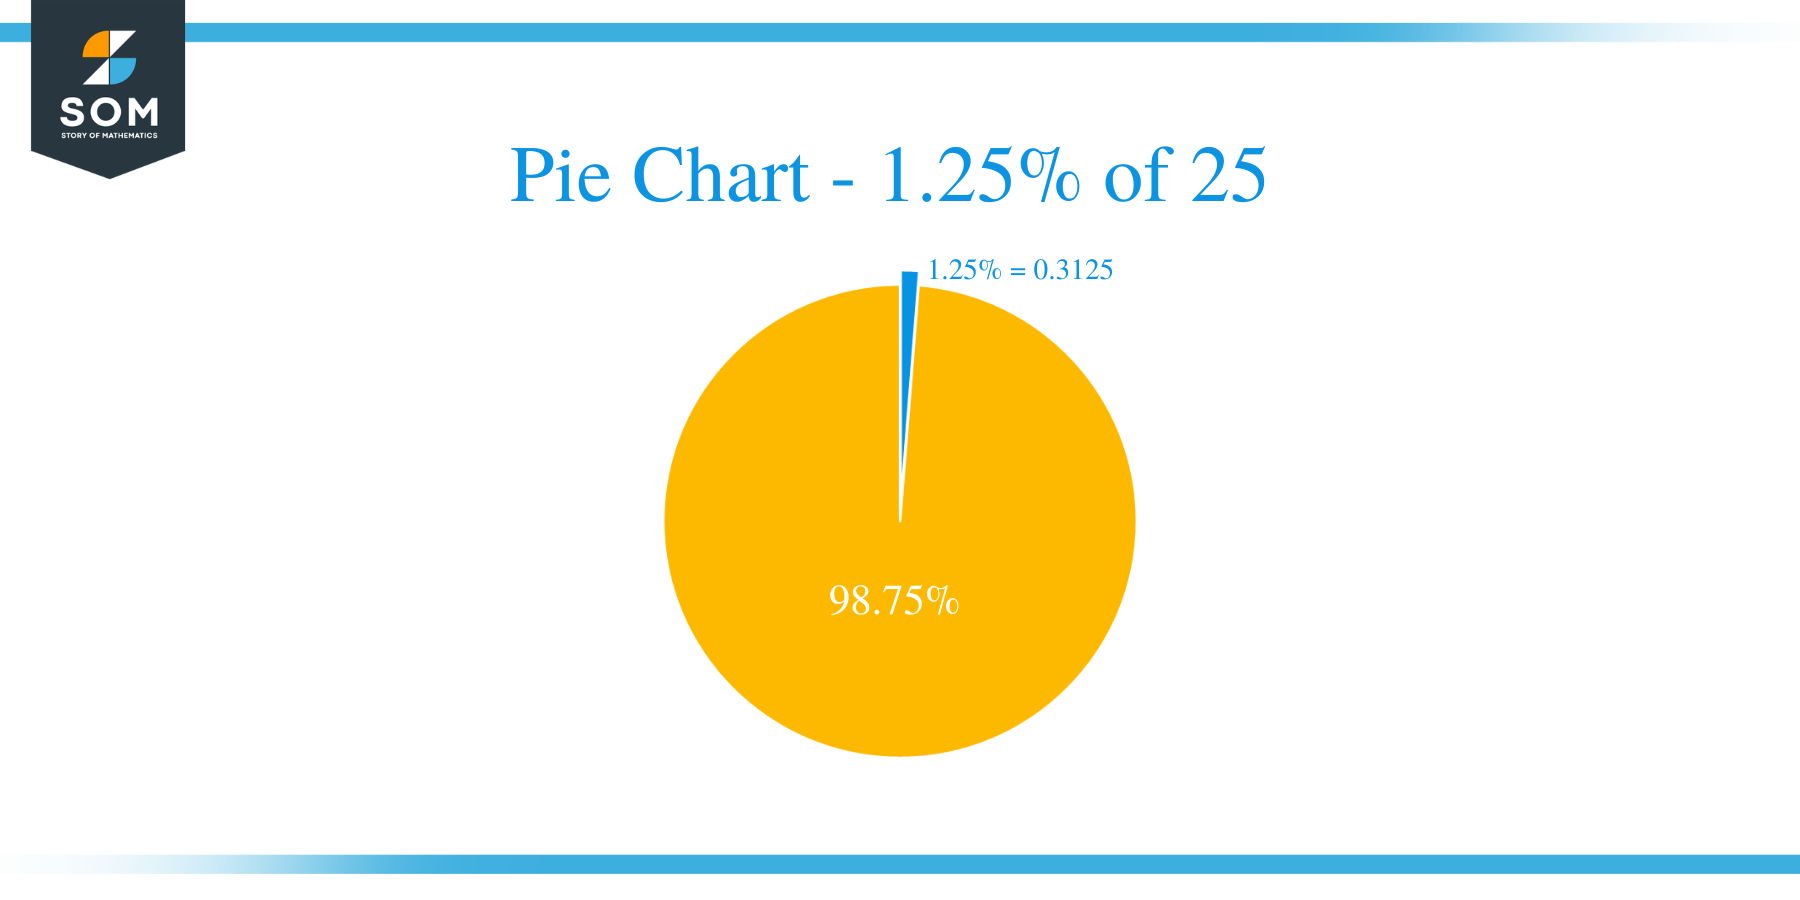 pie chart of 1.25 of 25